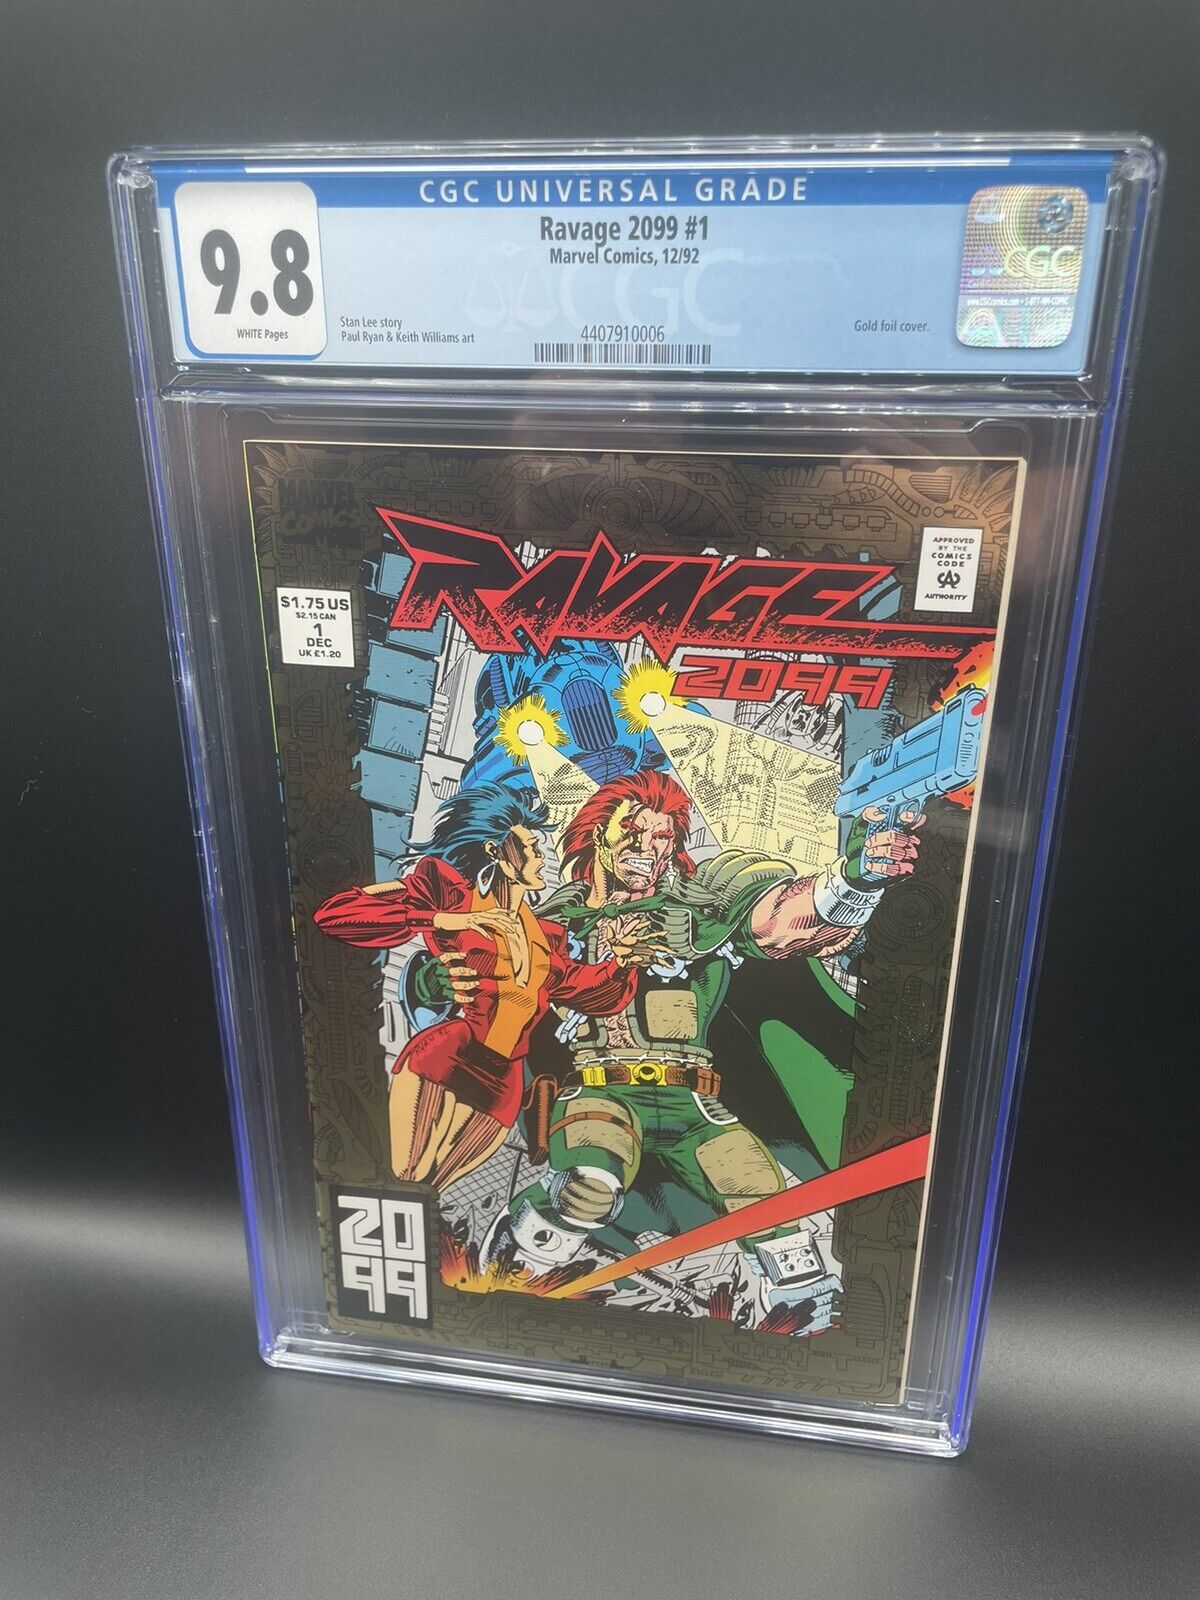 Ravage 2099 #1 Gold Foil Cover 12/92 CGC 9.8